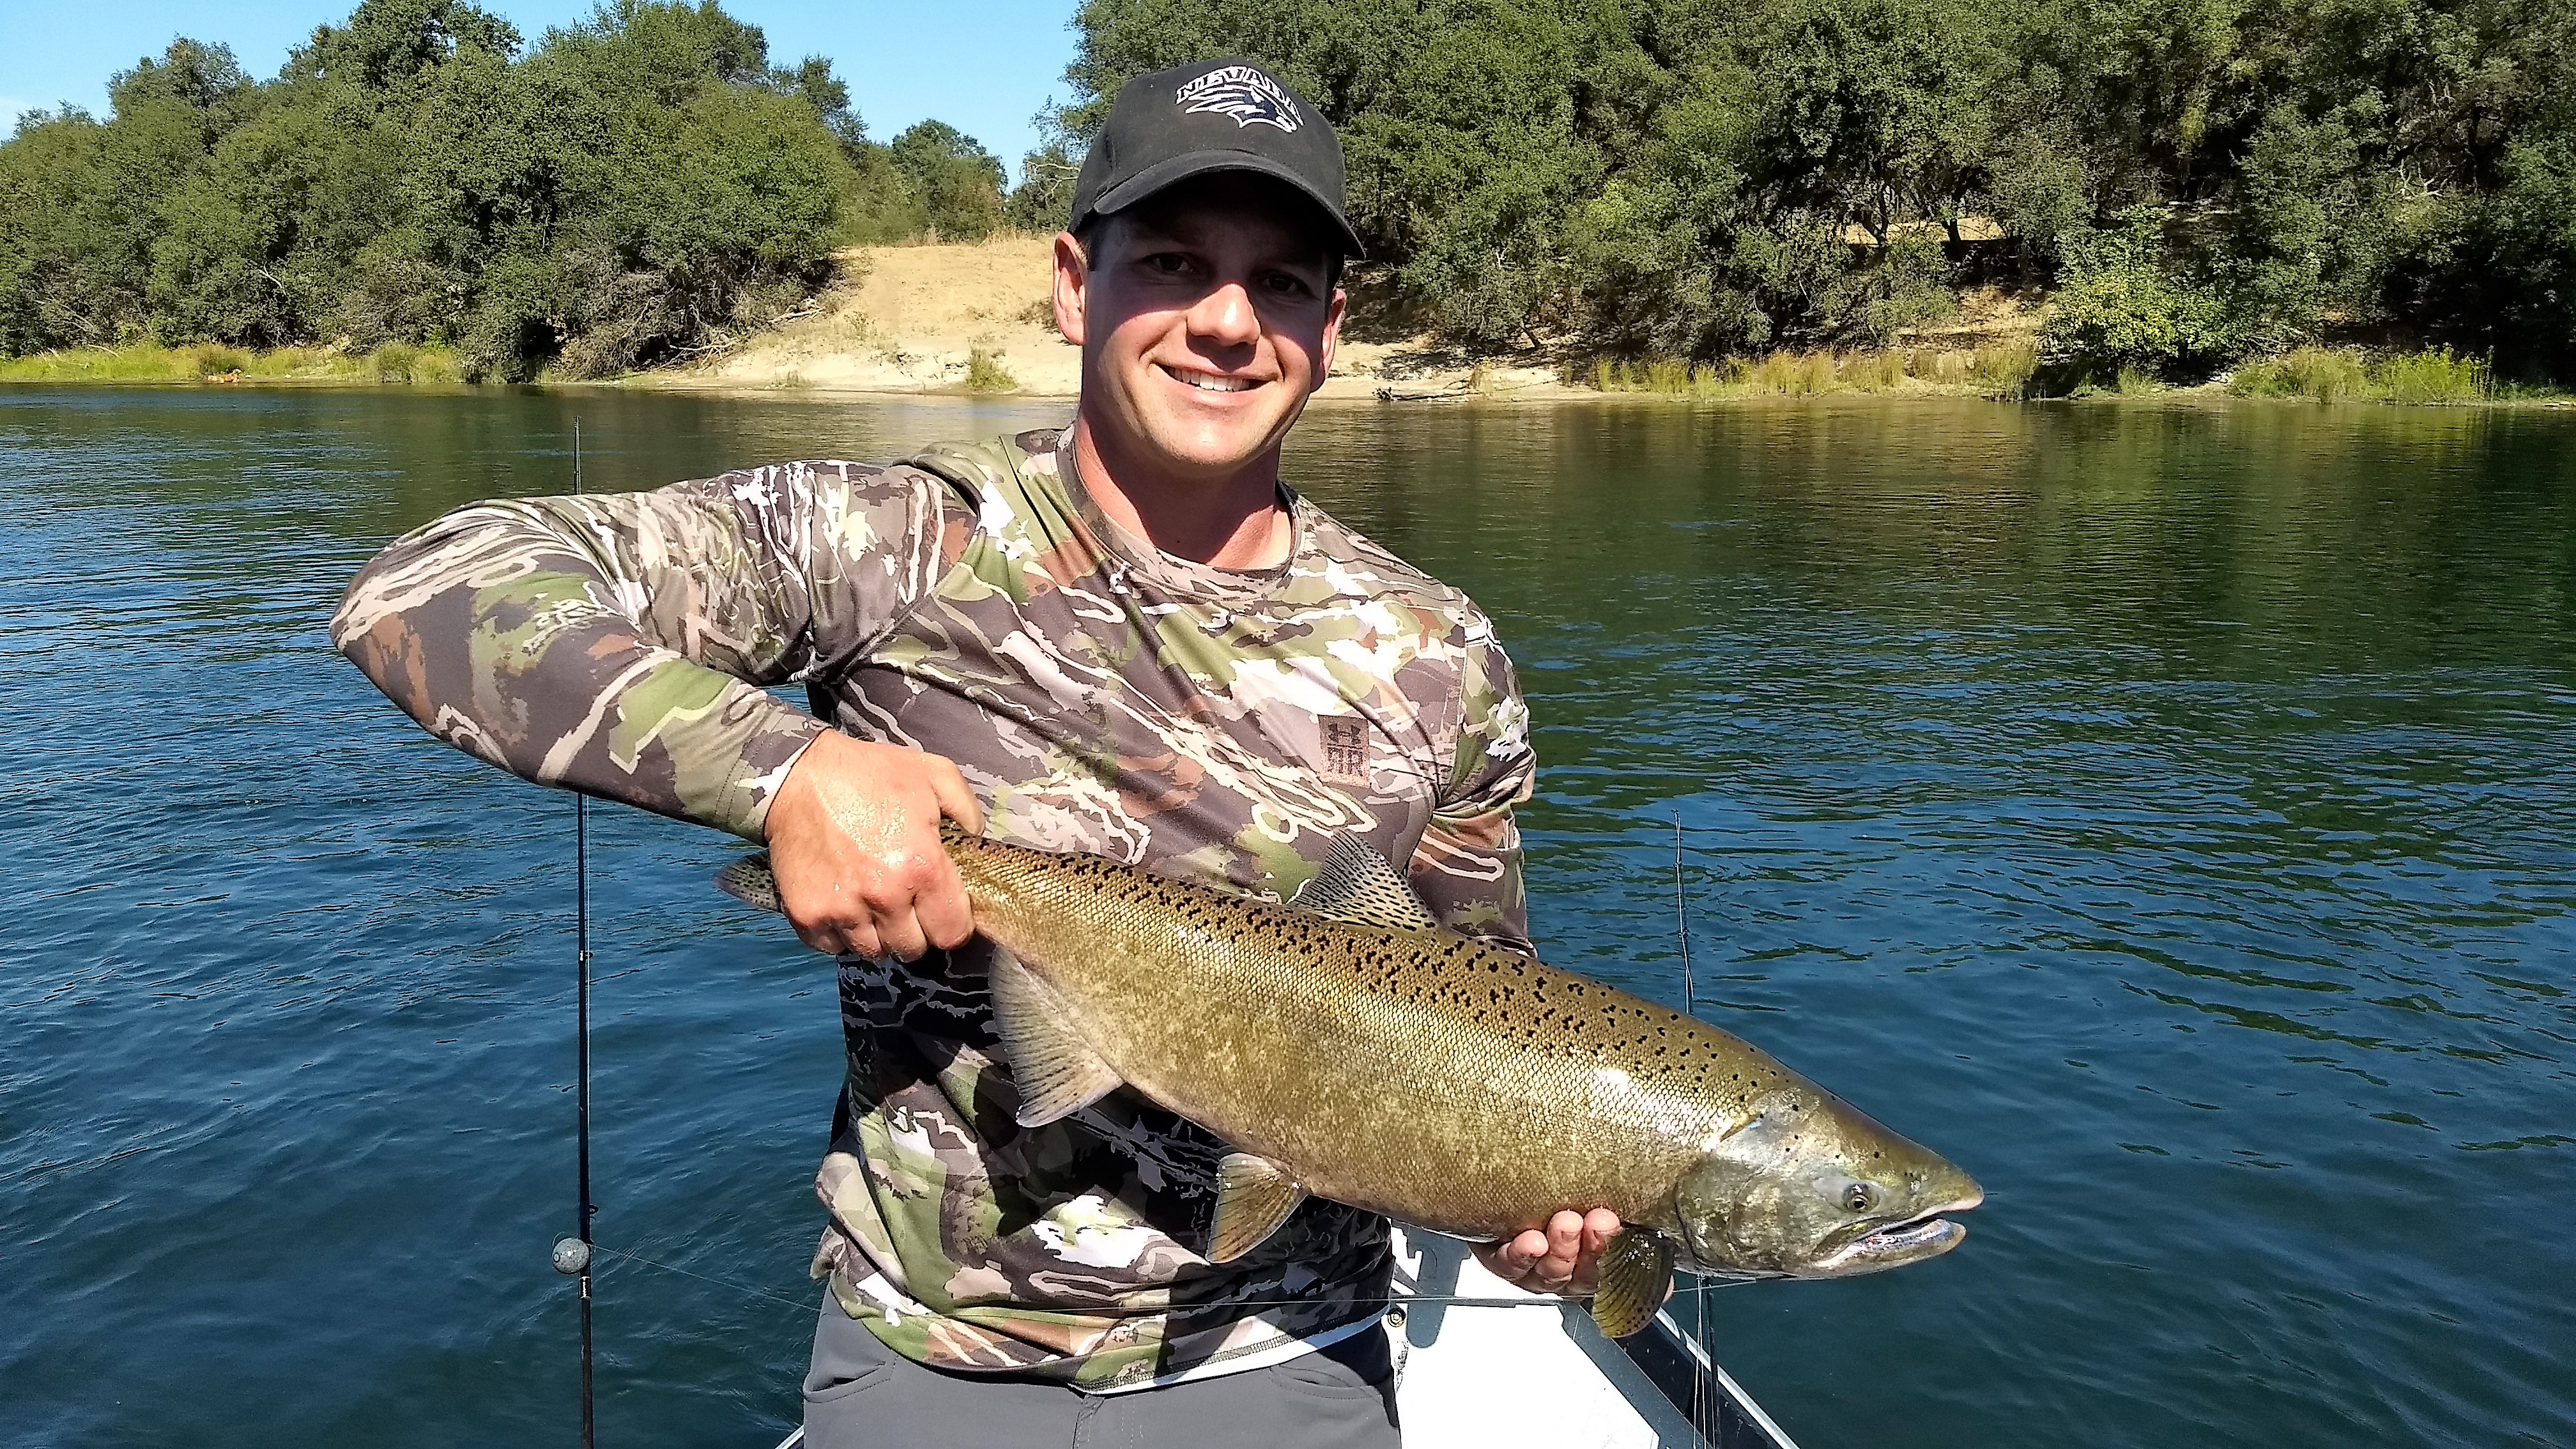 Chrome Invades The American River